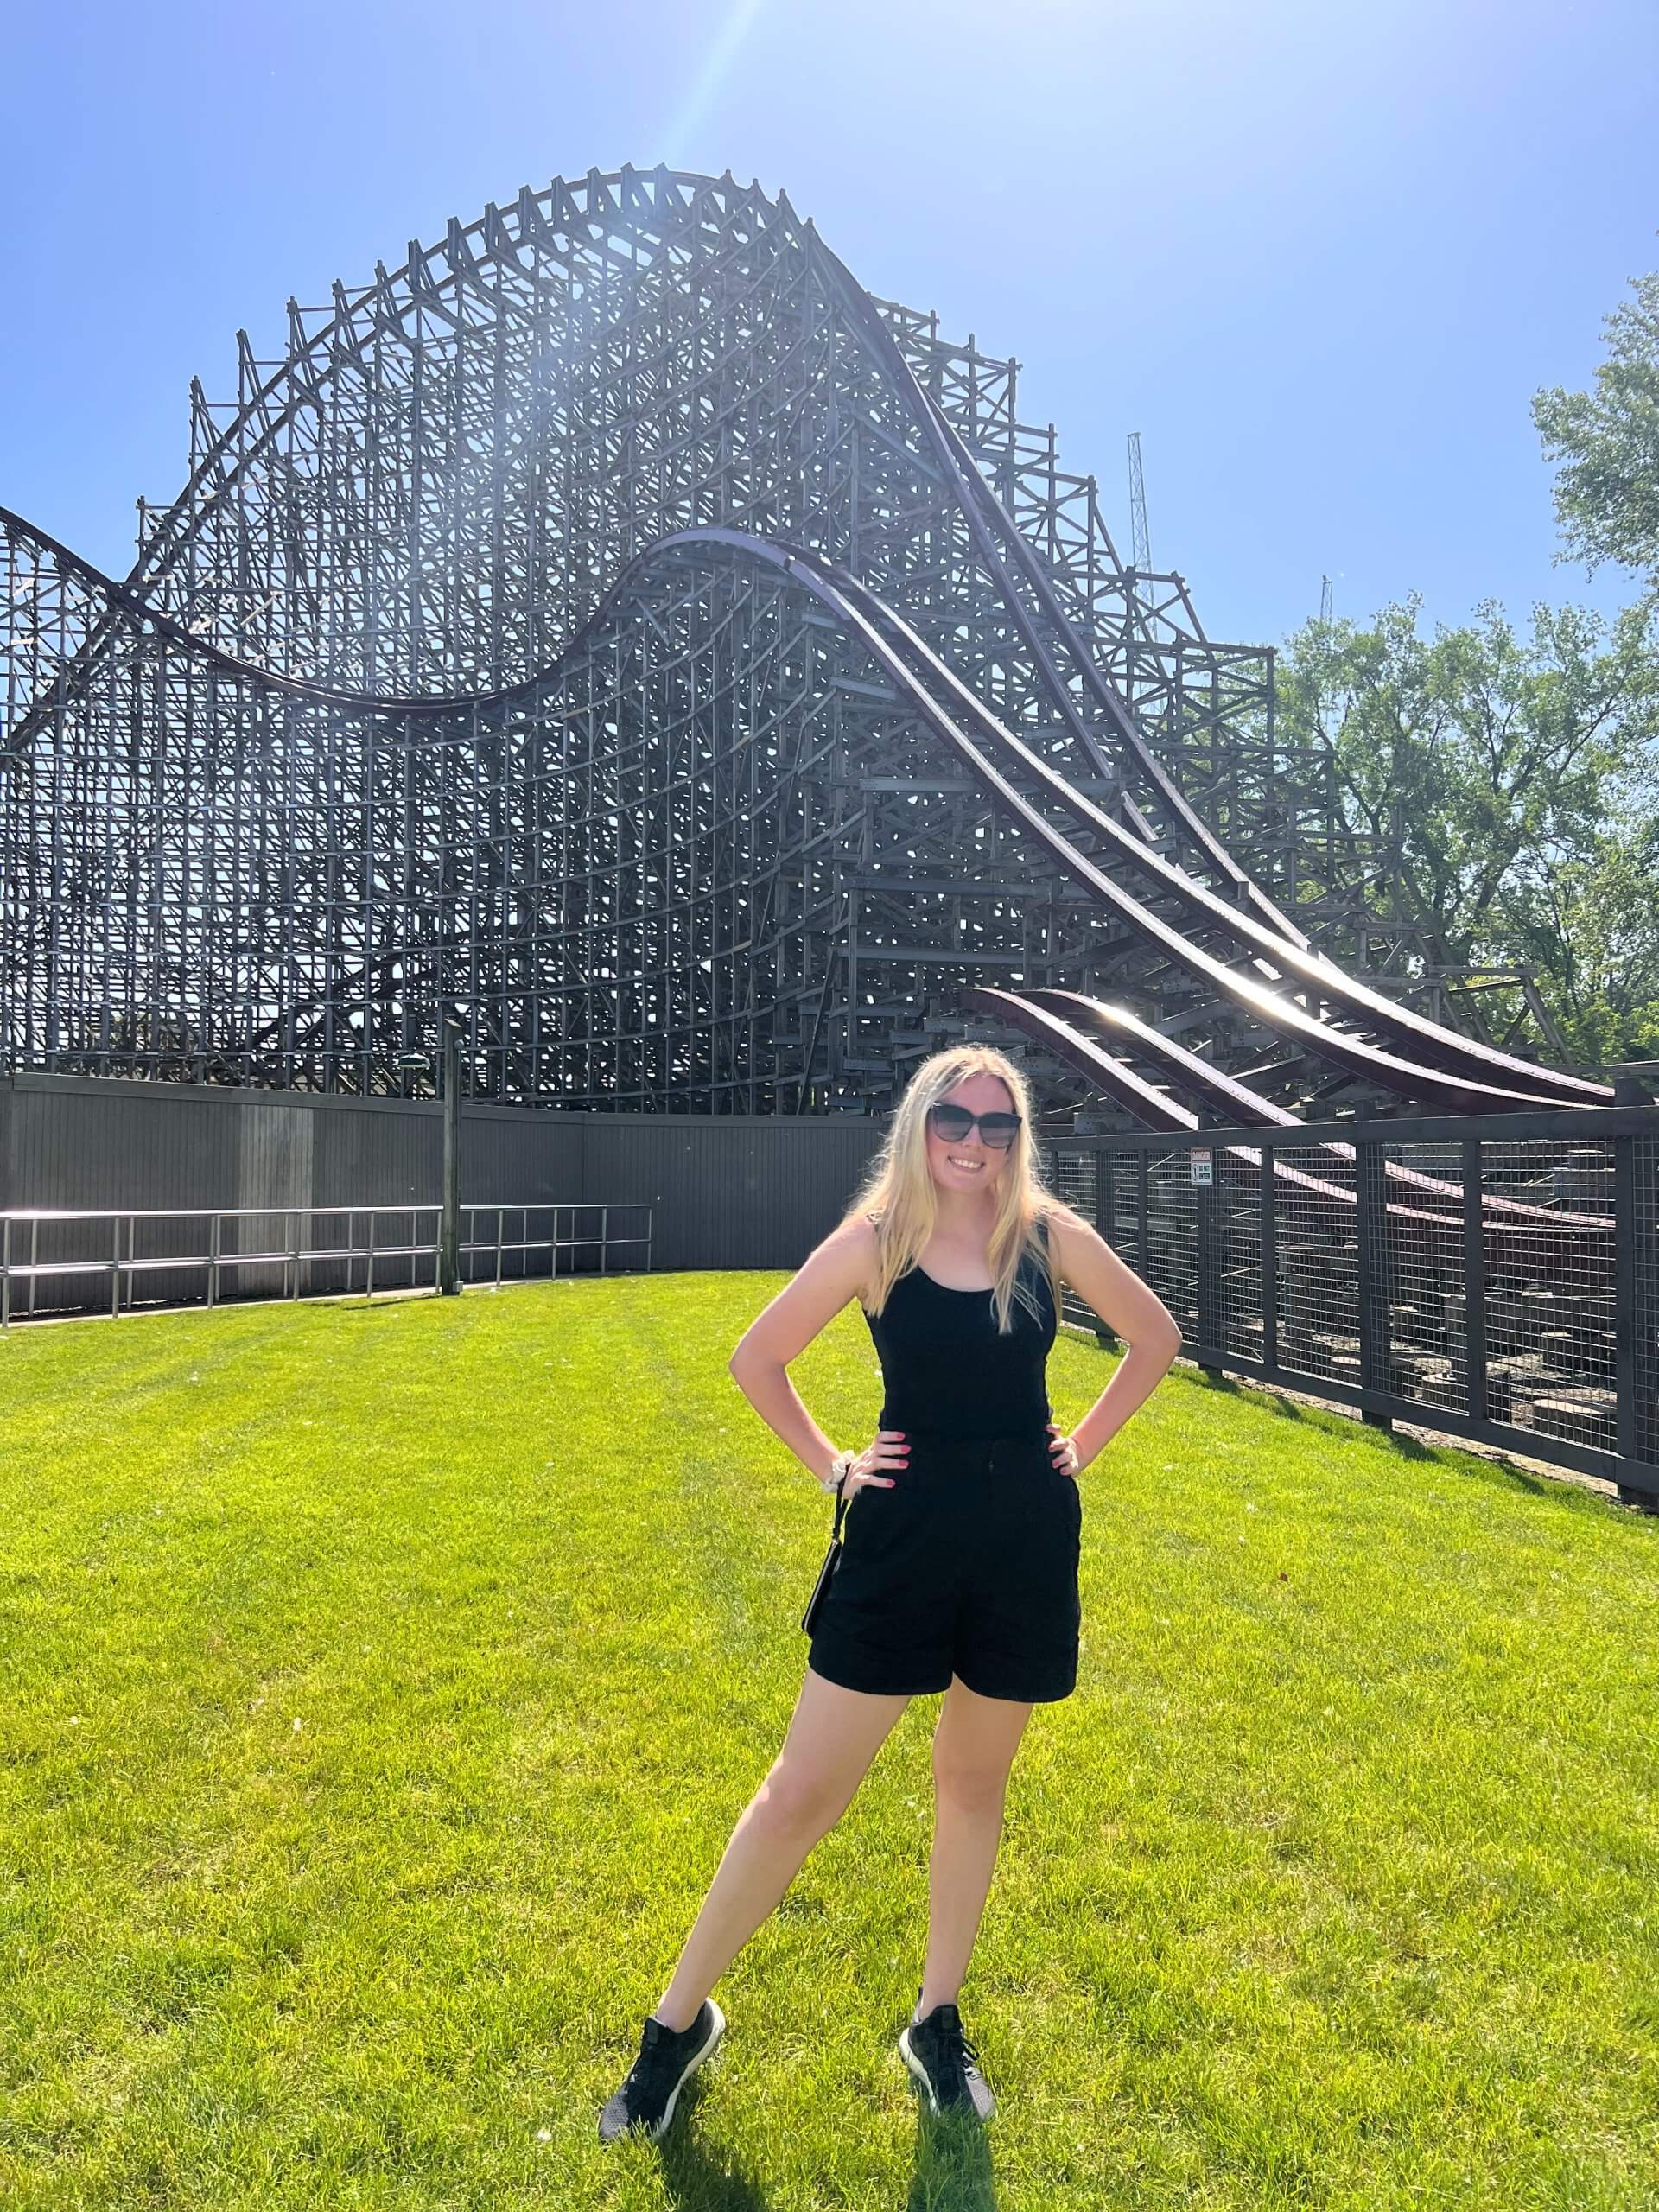 Courtney standing in front of her favorite roller coaster